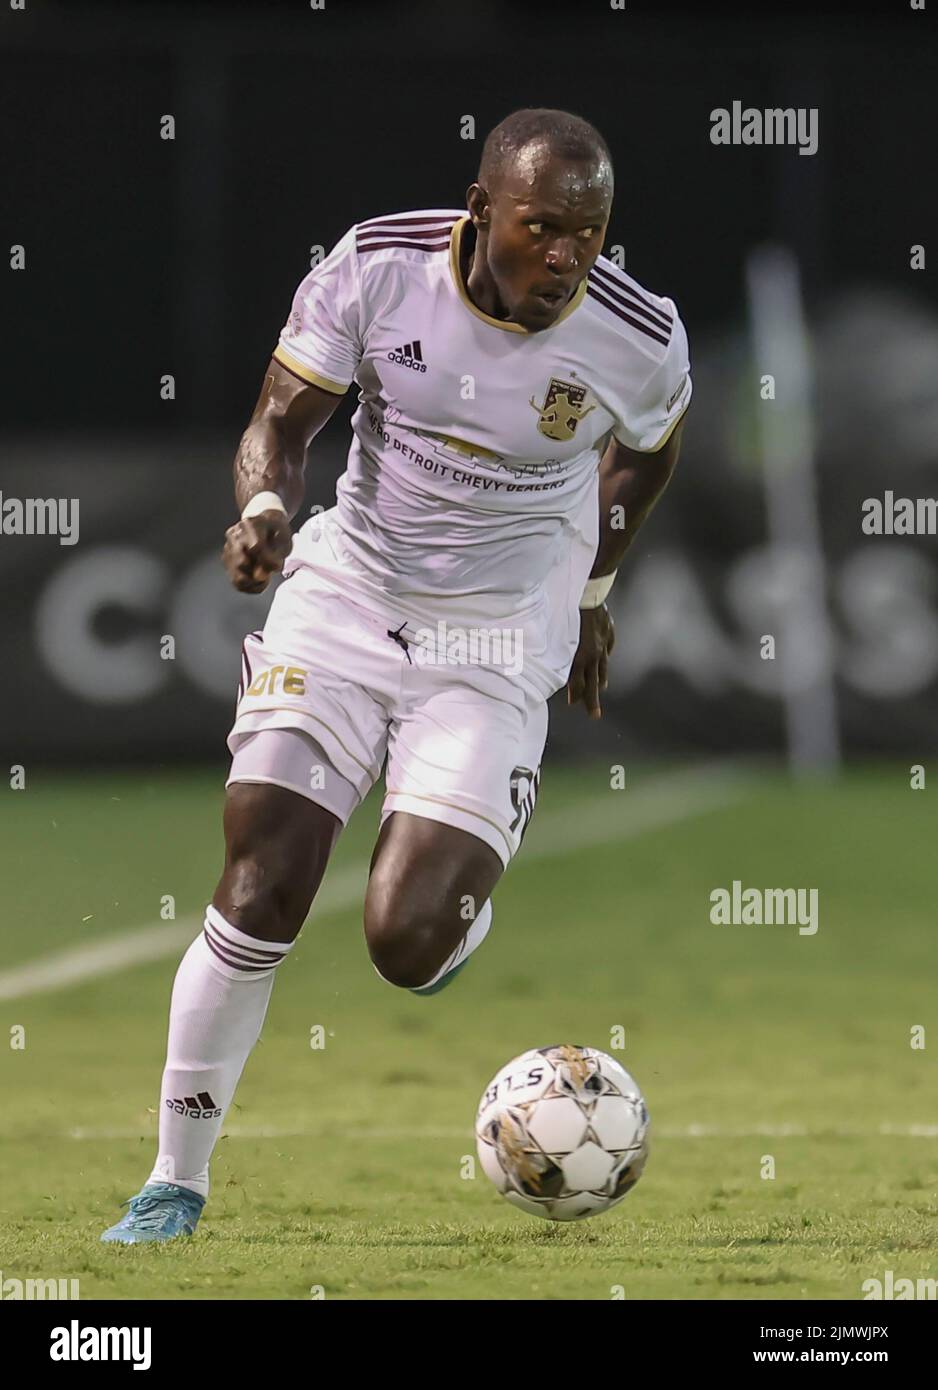 St. Petersburg, FL: Detroit City forward Francis Atuahene (9) dribbles the ball up the pitch during a USL soccer game against the Tampa Bay Rowdies, S Stock Photo